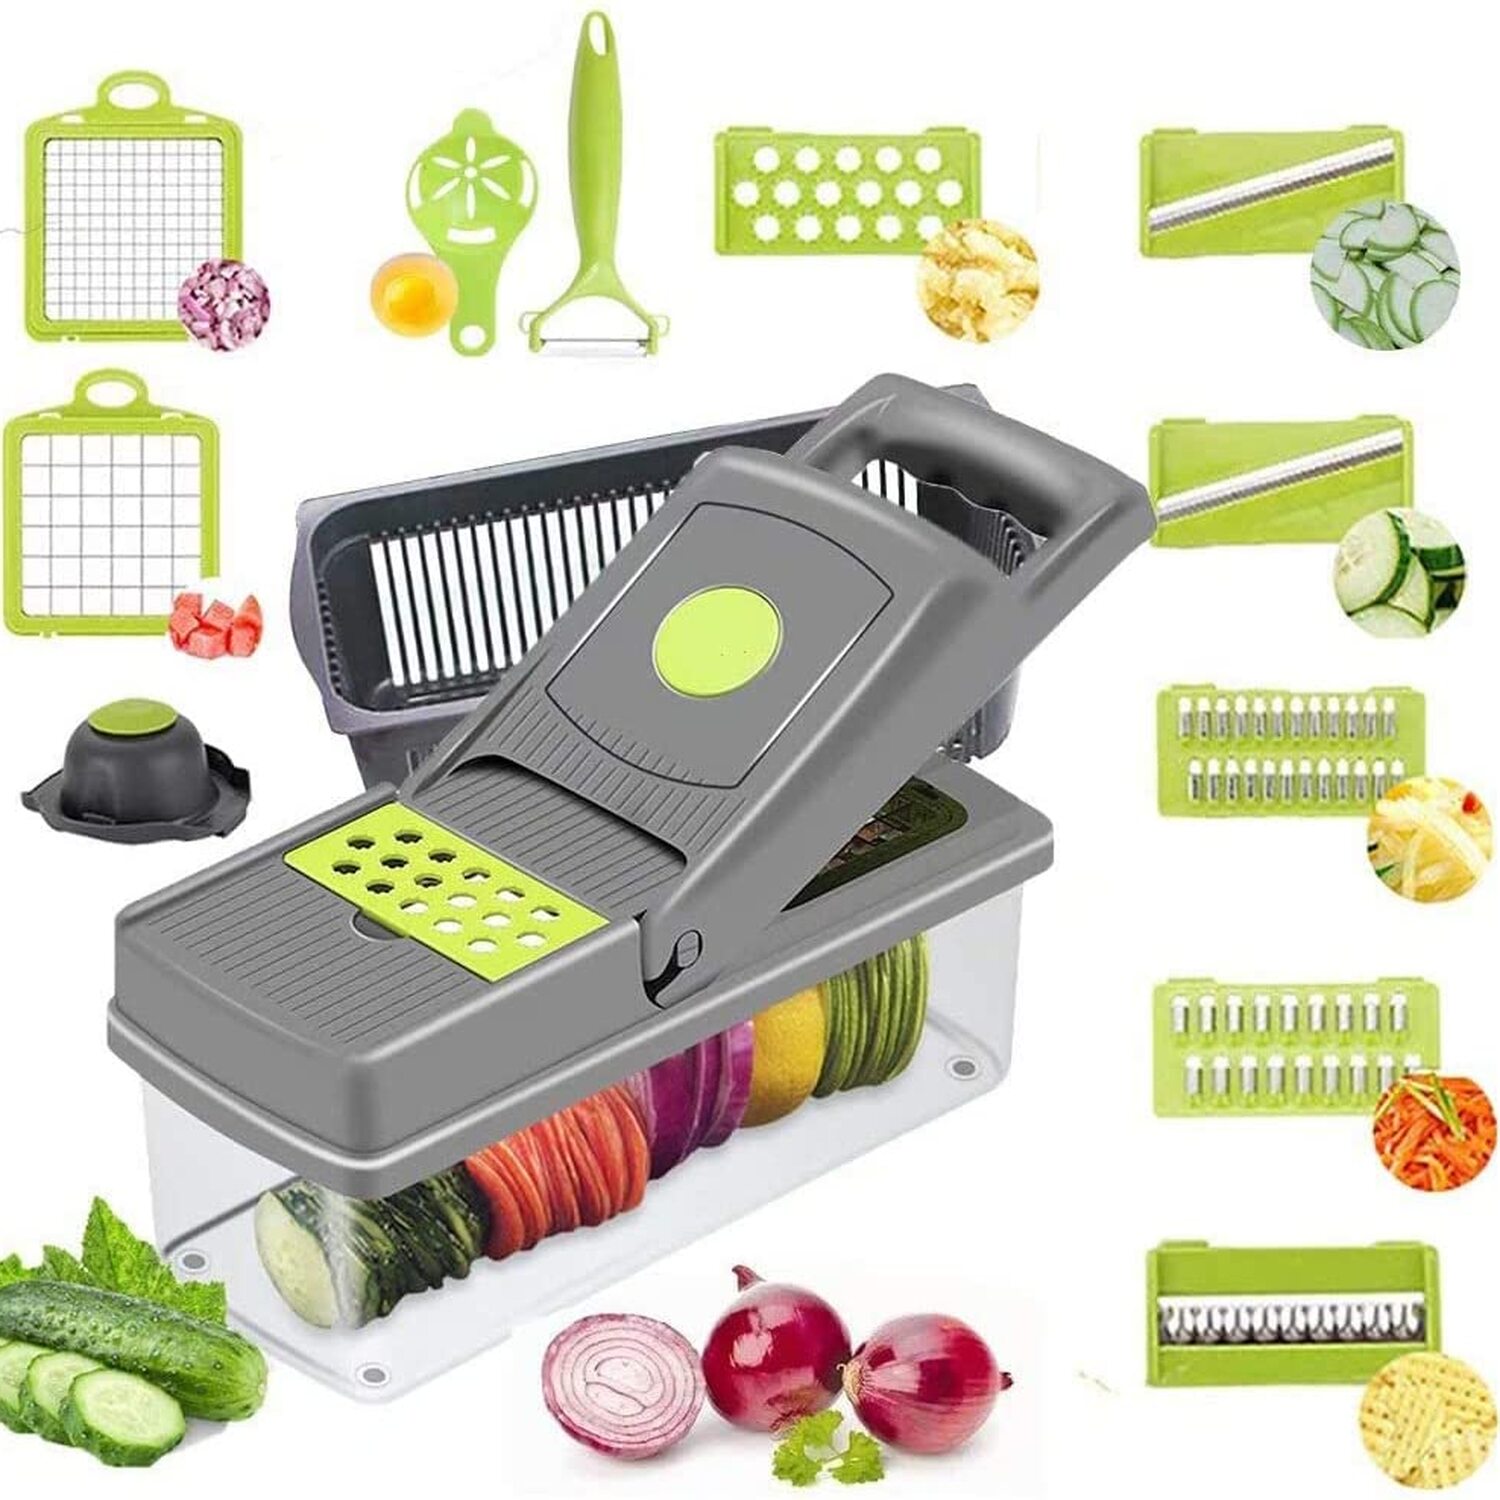 Exploring Innovative Features of Modern Vegetable Choppers: Multiple Speed Settings, Interchangeable Blades, Safety Locking Mechanisms, and Built-In Storage for Chopped Vegetables插图